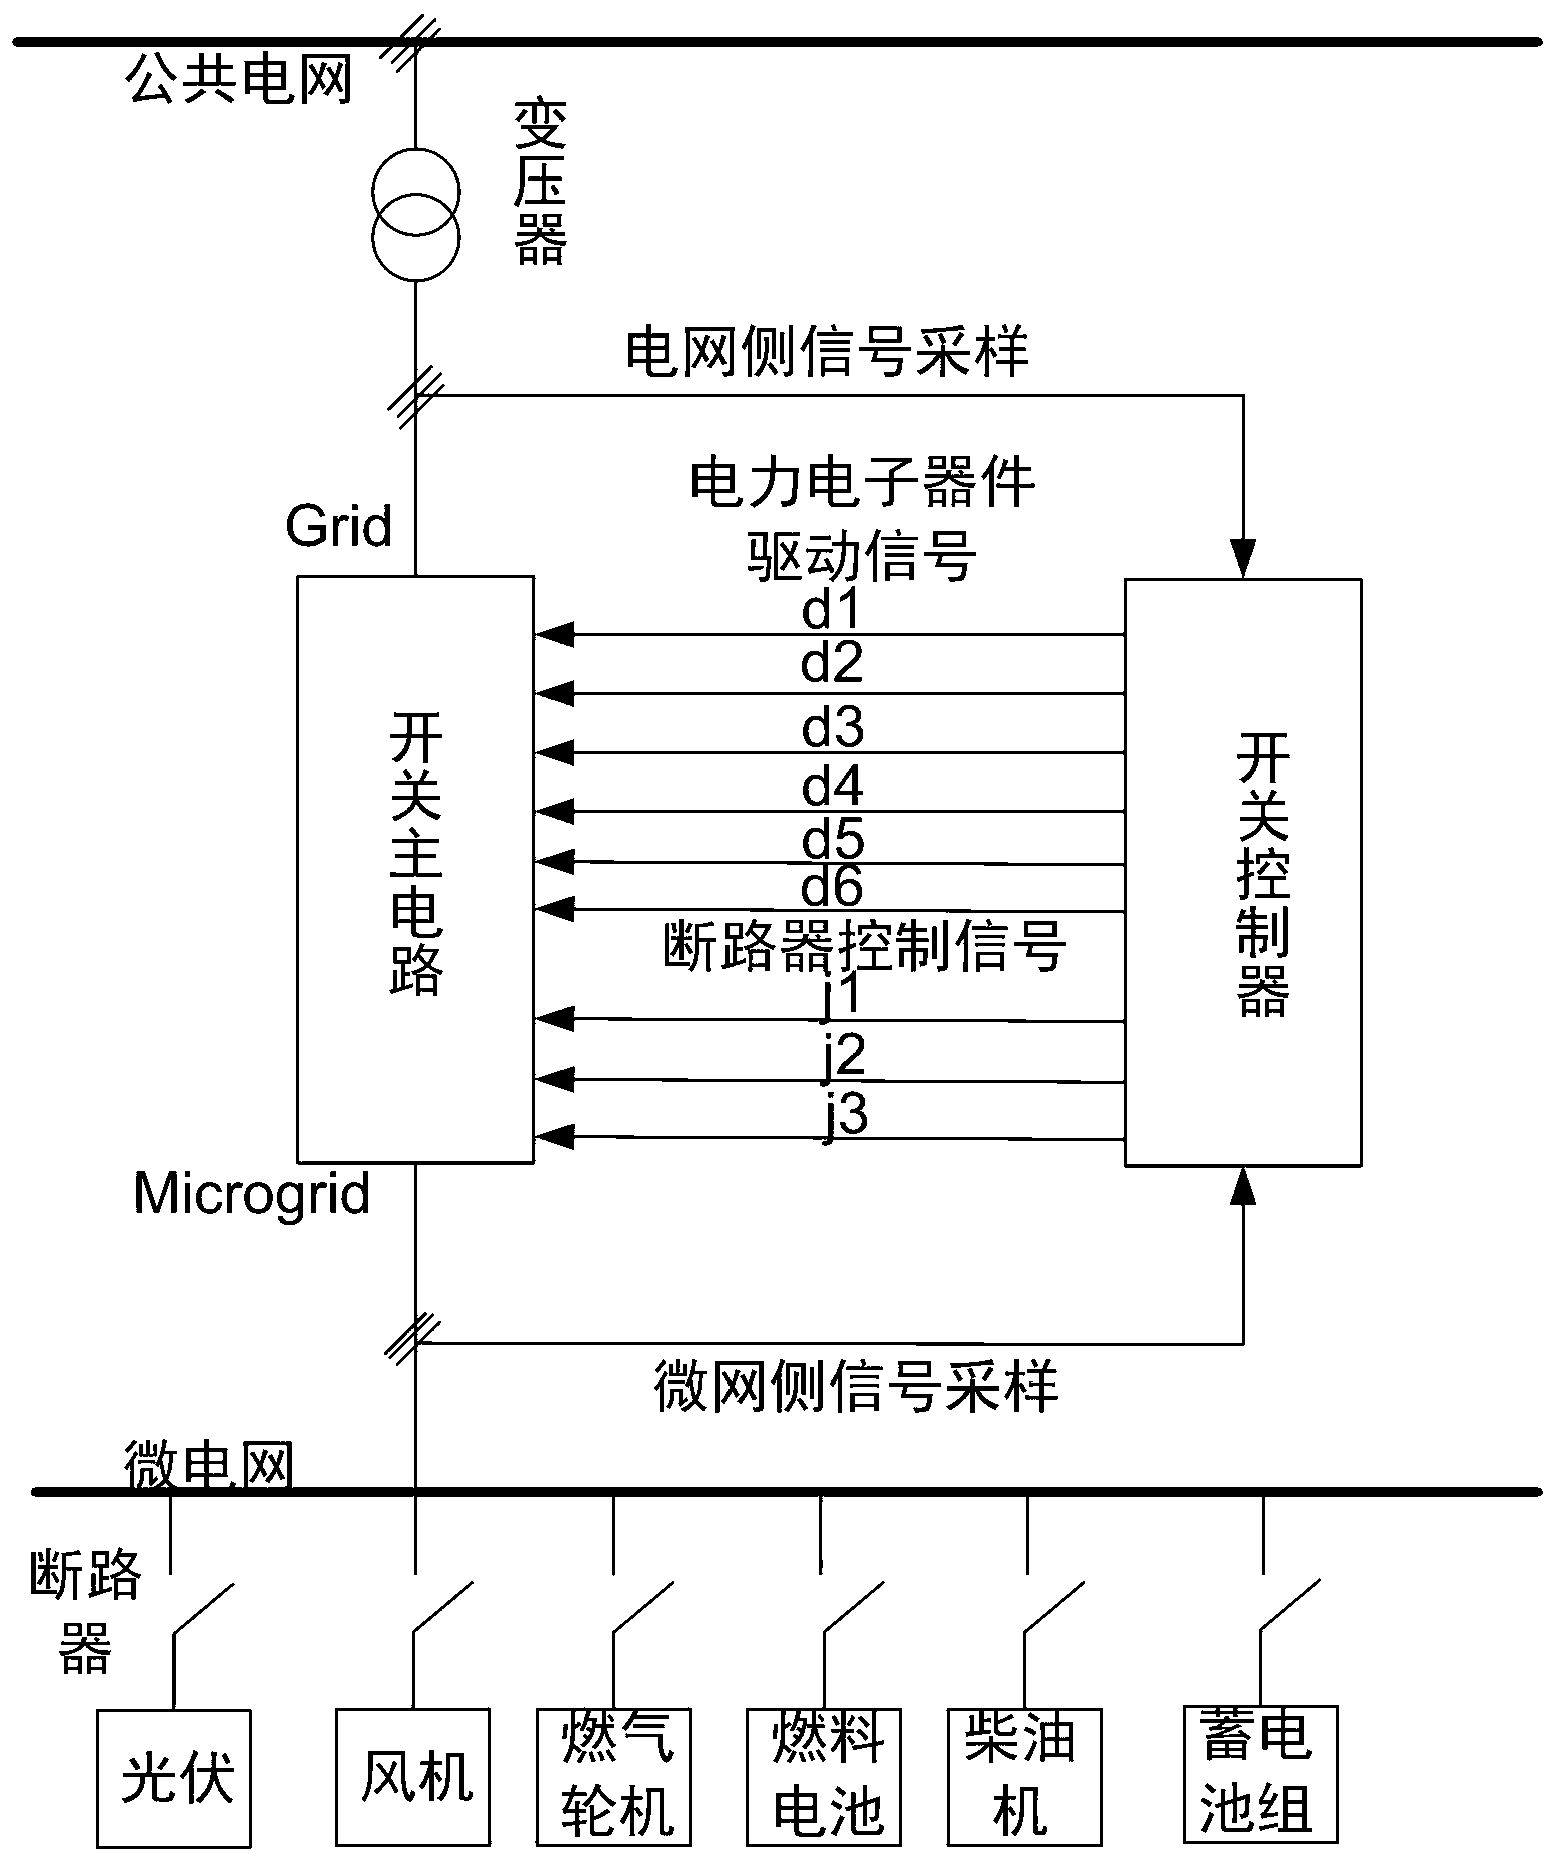 Static switch and control method applied to connection of microgrid and public supply network